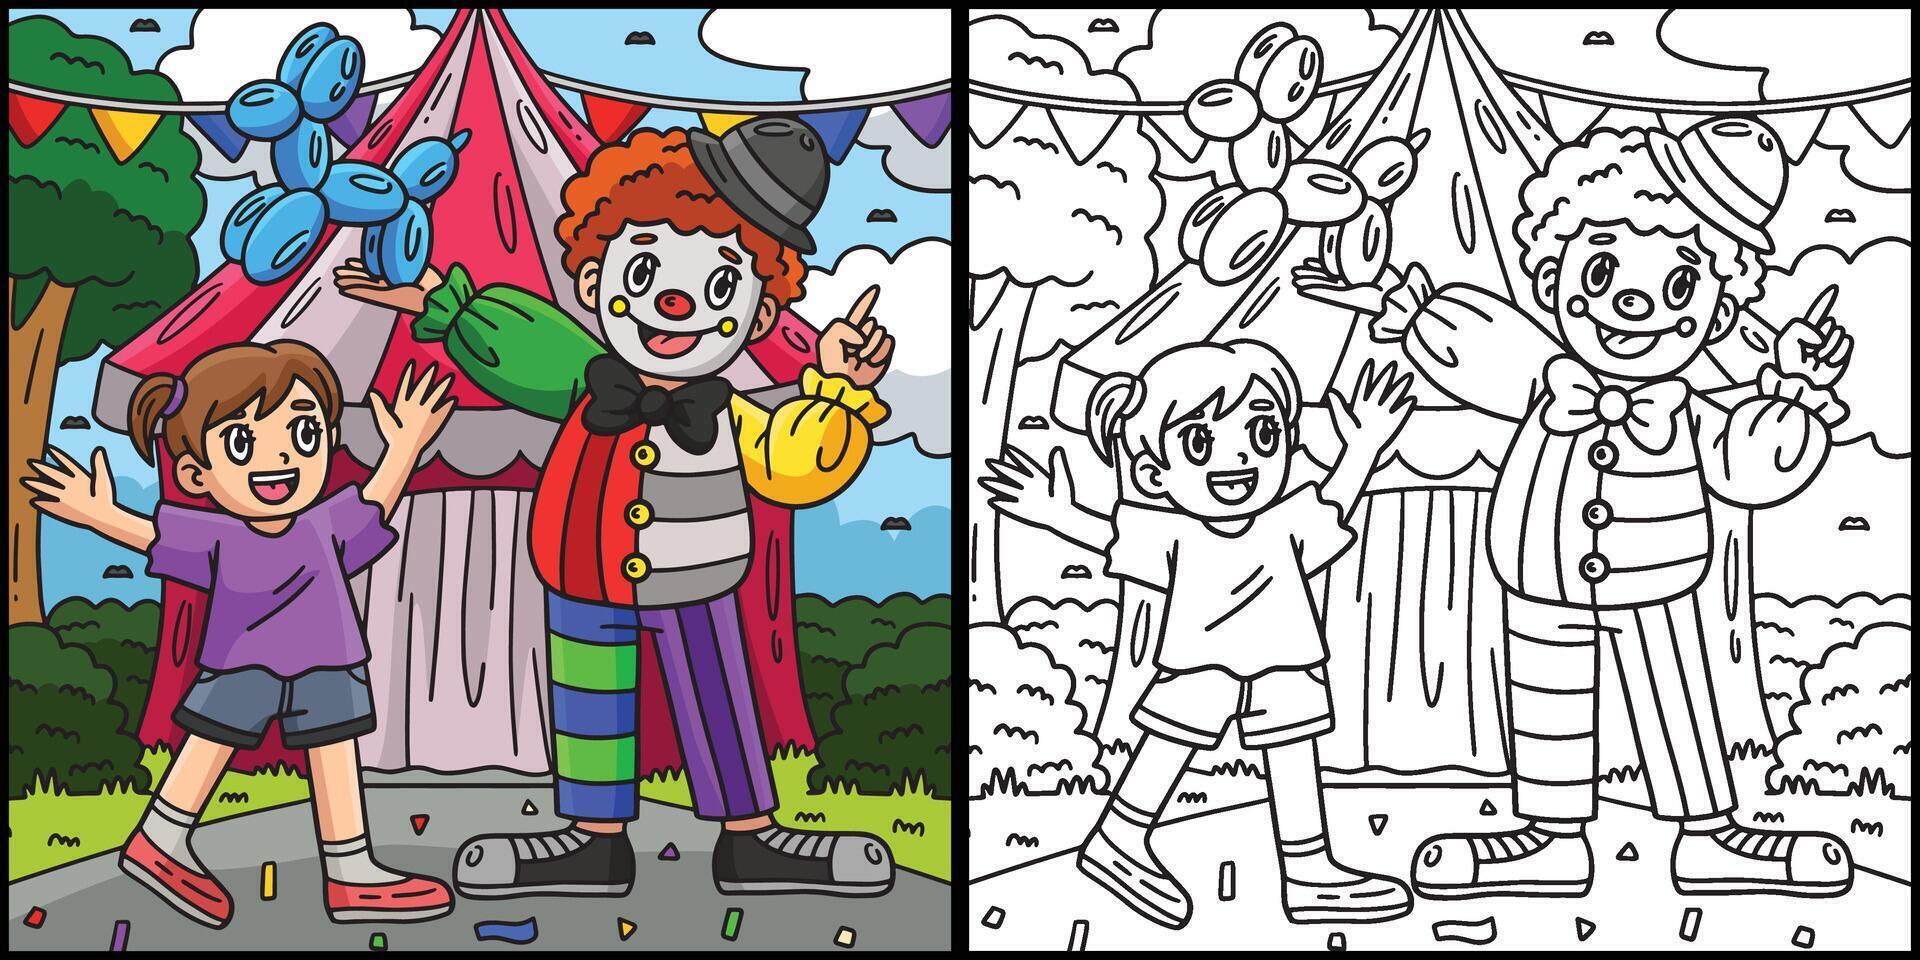 Circus Child and Clown Coloring Page Illustration vector